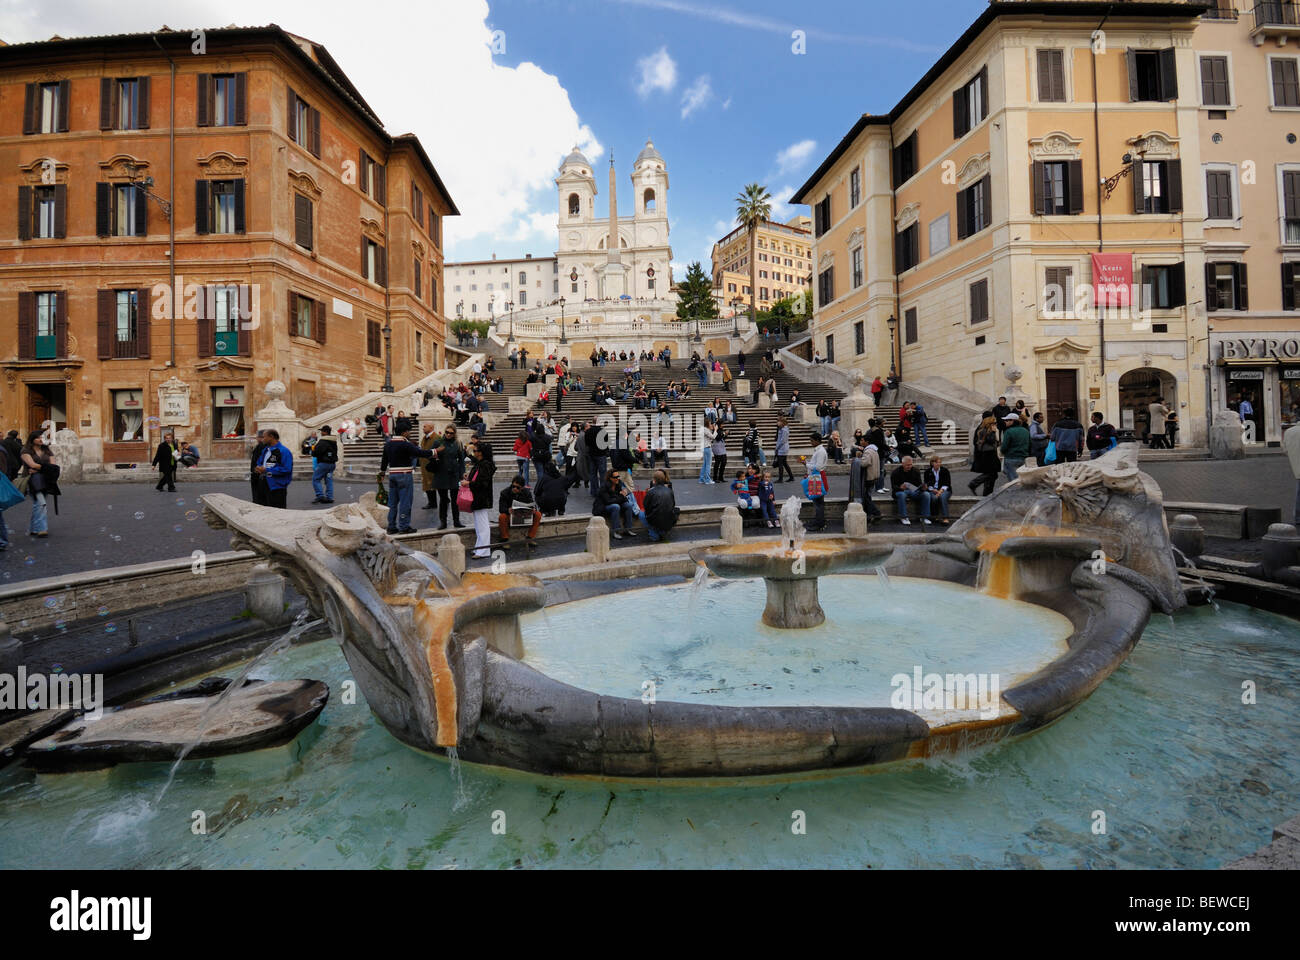 The Fountain of the Old Boat (Fontana della Barcaccia) in front of the Spanish Steps, Rome, Italy Stock Photo